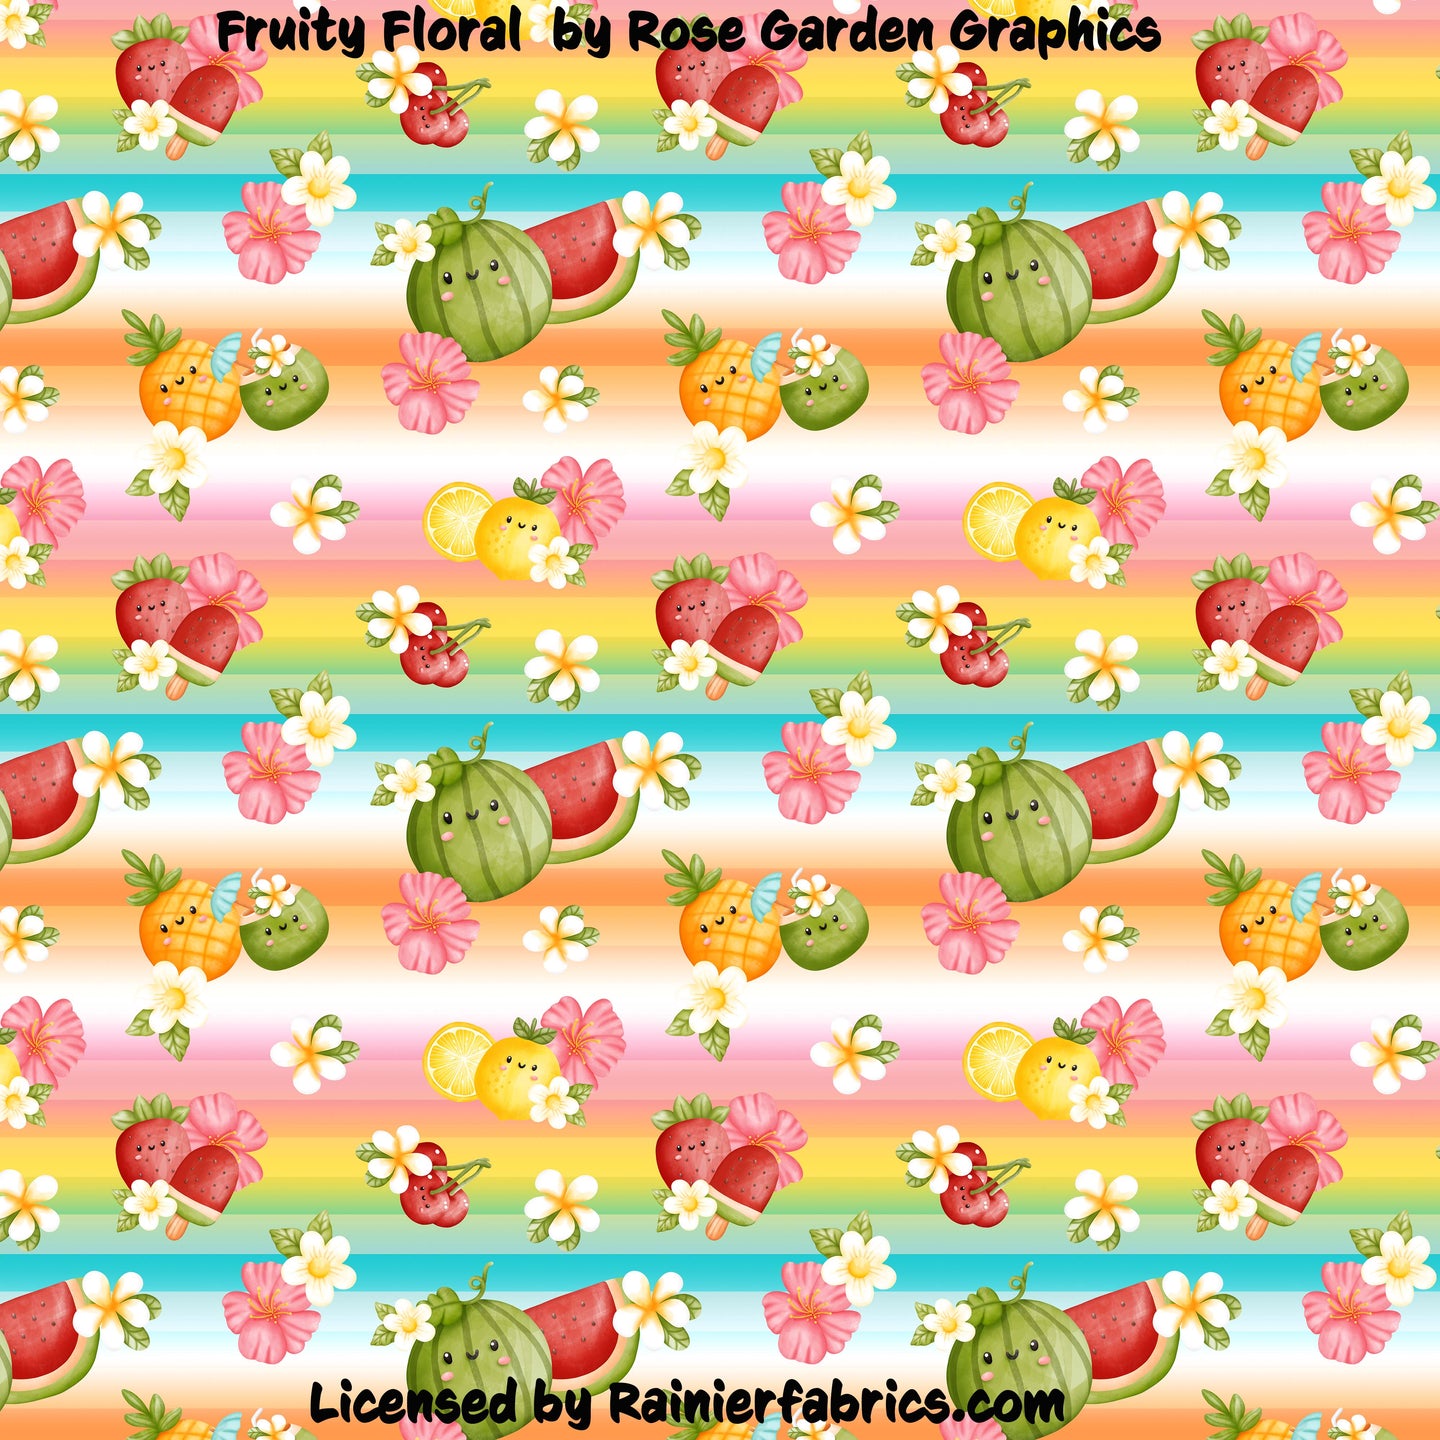 Fruity Floral by Rose Garden Graphics - 2-5 day turnaround - Order by 1/2 yard; Description of bases below